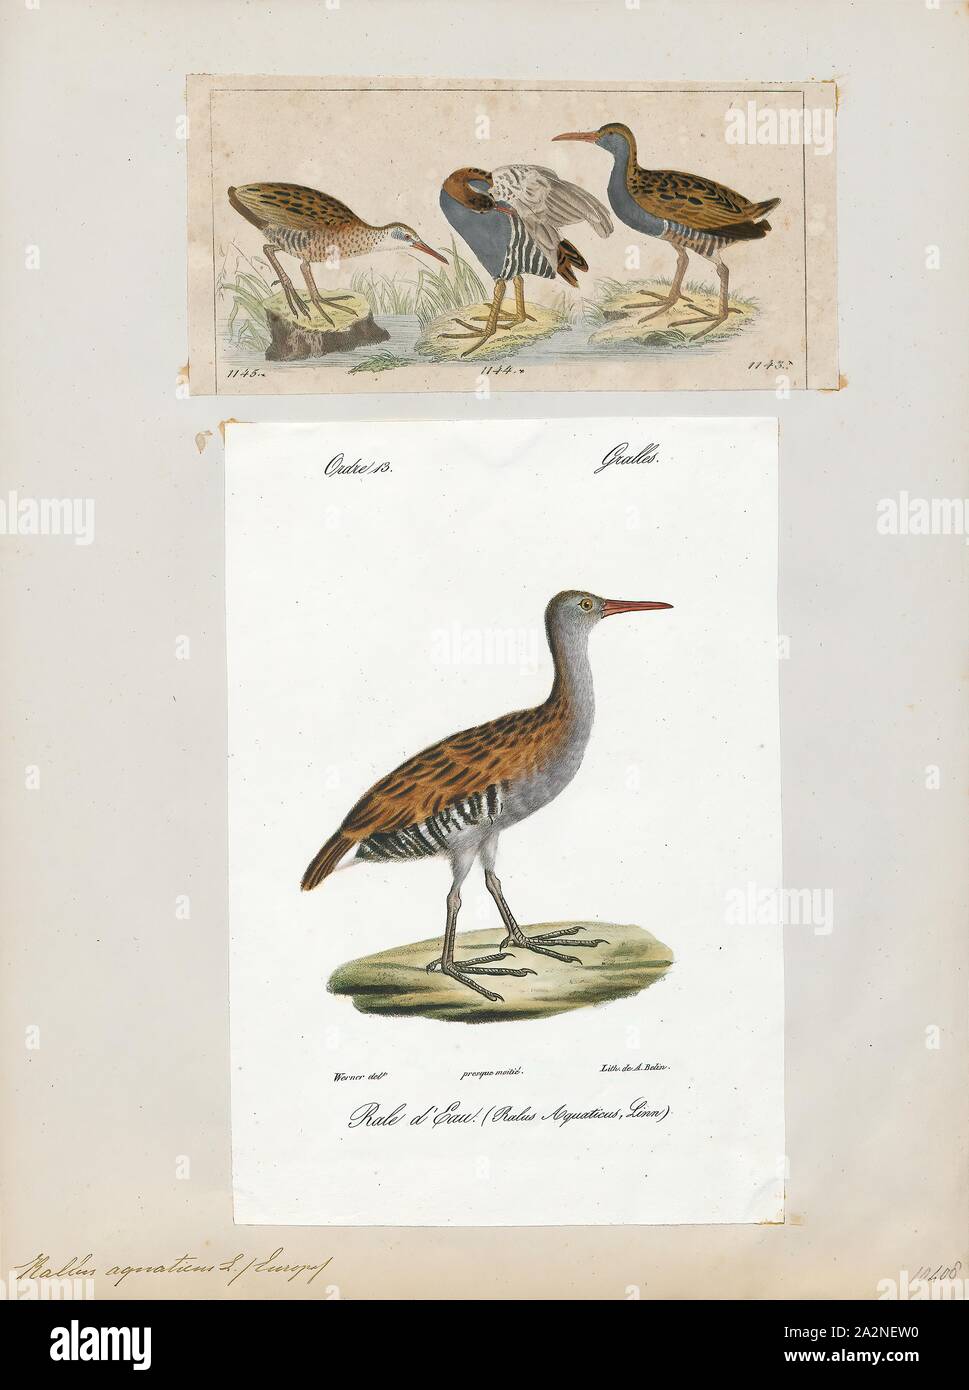 Rallus aquaticus, Print, The water rail (Rallus aquaticus) is a bird of the rail family which breeds in well-vegetated wetlands across Europe, Asia and North Africa. Northern and eastern populations are migratory, but this species is a permanent resident in the warmer parts of its breeding range. The adult is 23–28 cm (9–11 in) long, and, like other rails, has a body that is flattened laterally, allowing it easier passage through the reed beds it inhabits. It has mainly brown upperparts and blue-grey underparts, black barring on the flanks, long toes, a short tail and a long reddish bill Stock Photo